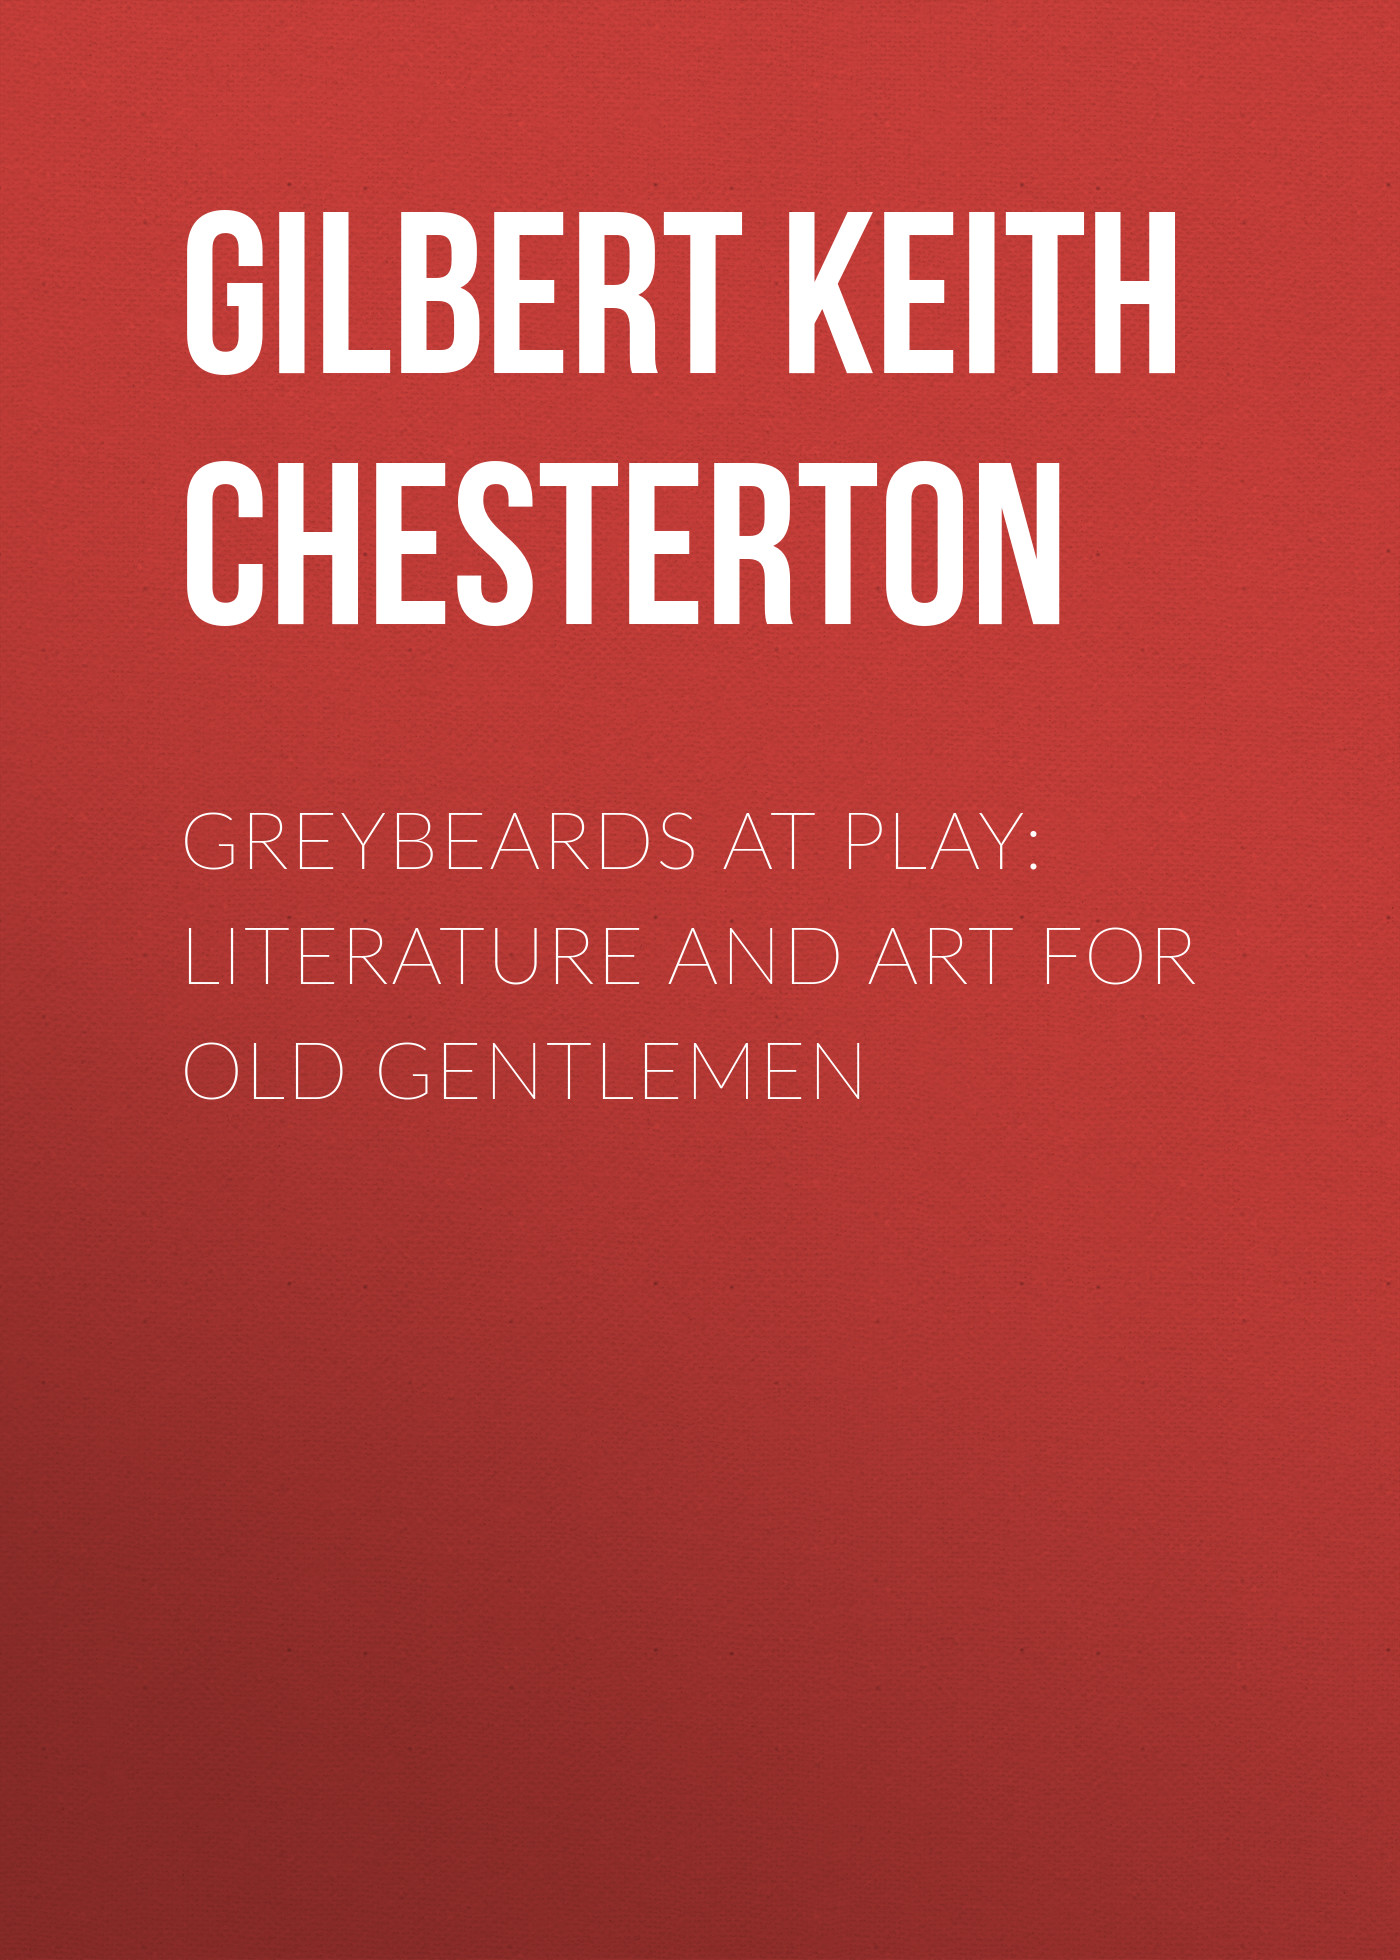 Greybeards at Play: Literature and Art for Old Gentlemen